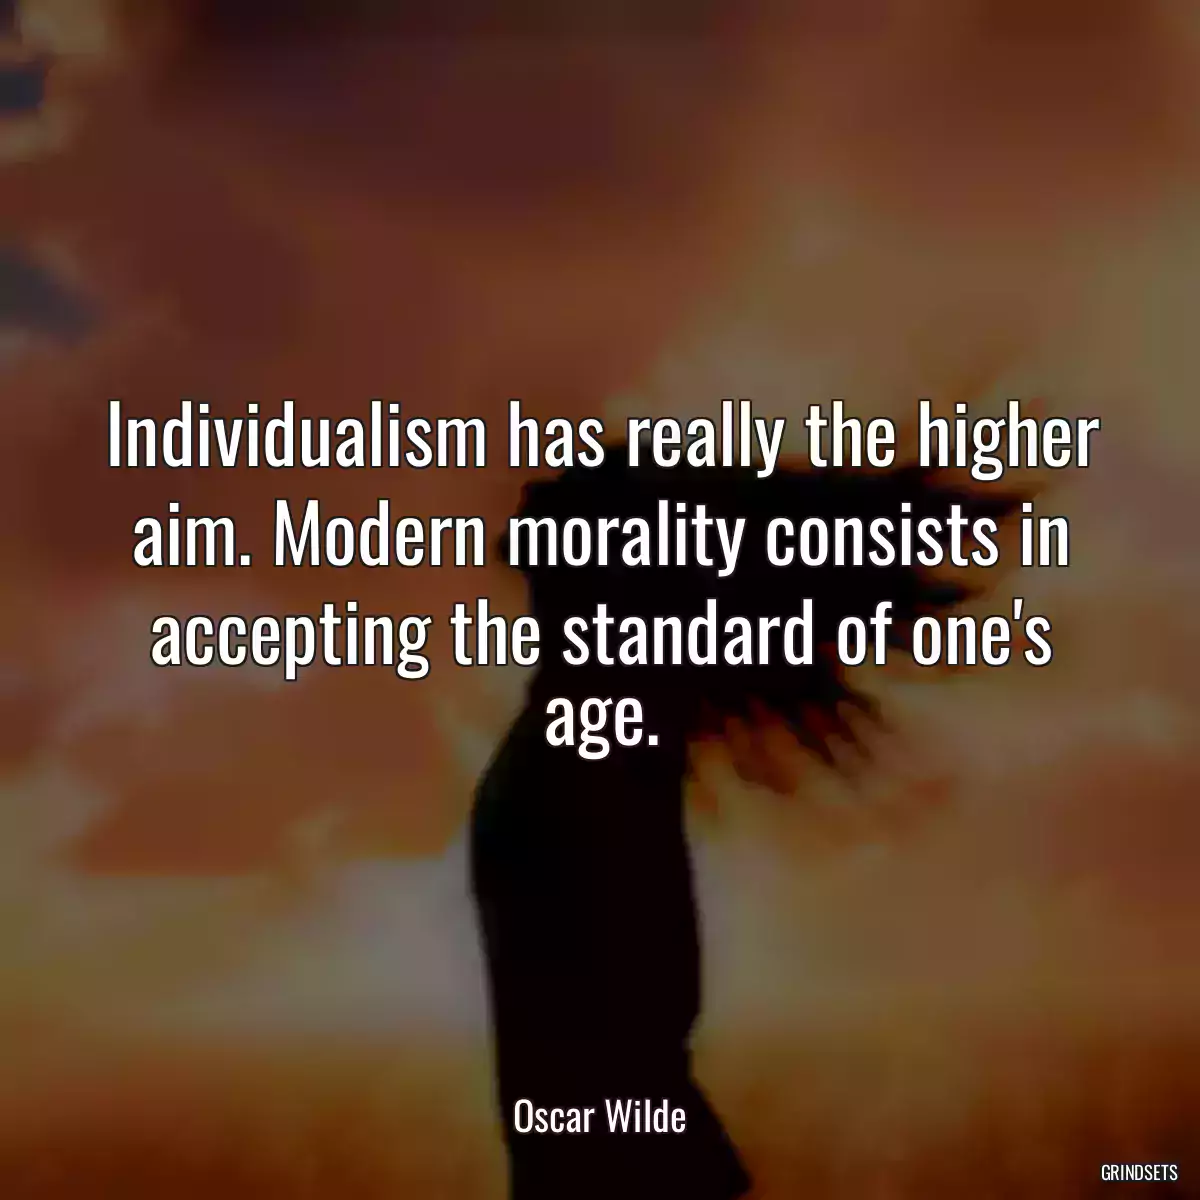 Individualism has really the higher aim. Modern morality consists in accepting the standard of one\'s age.